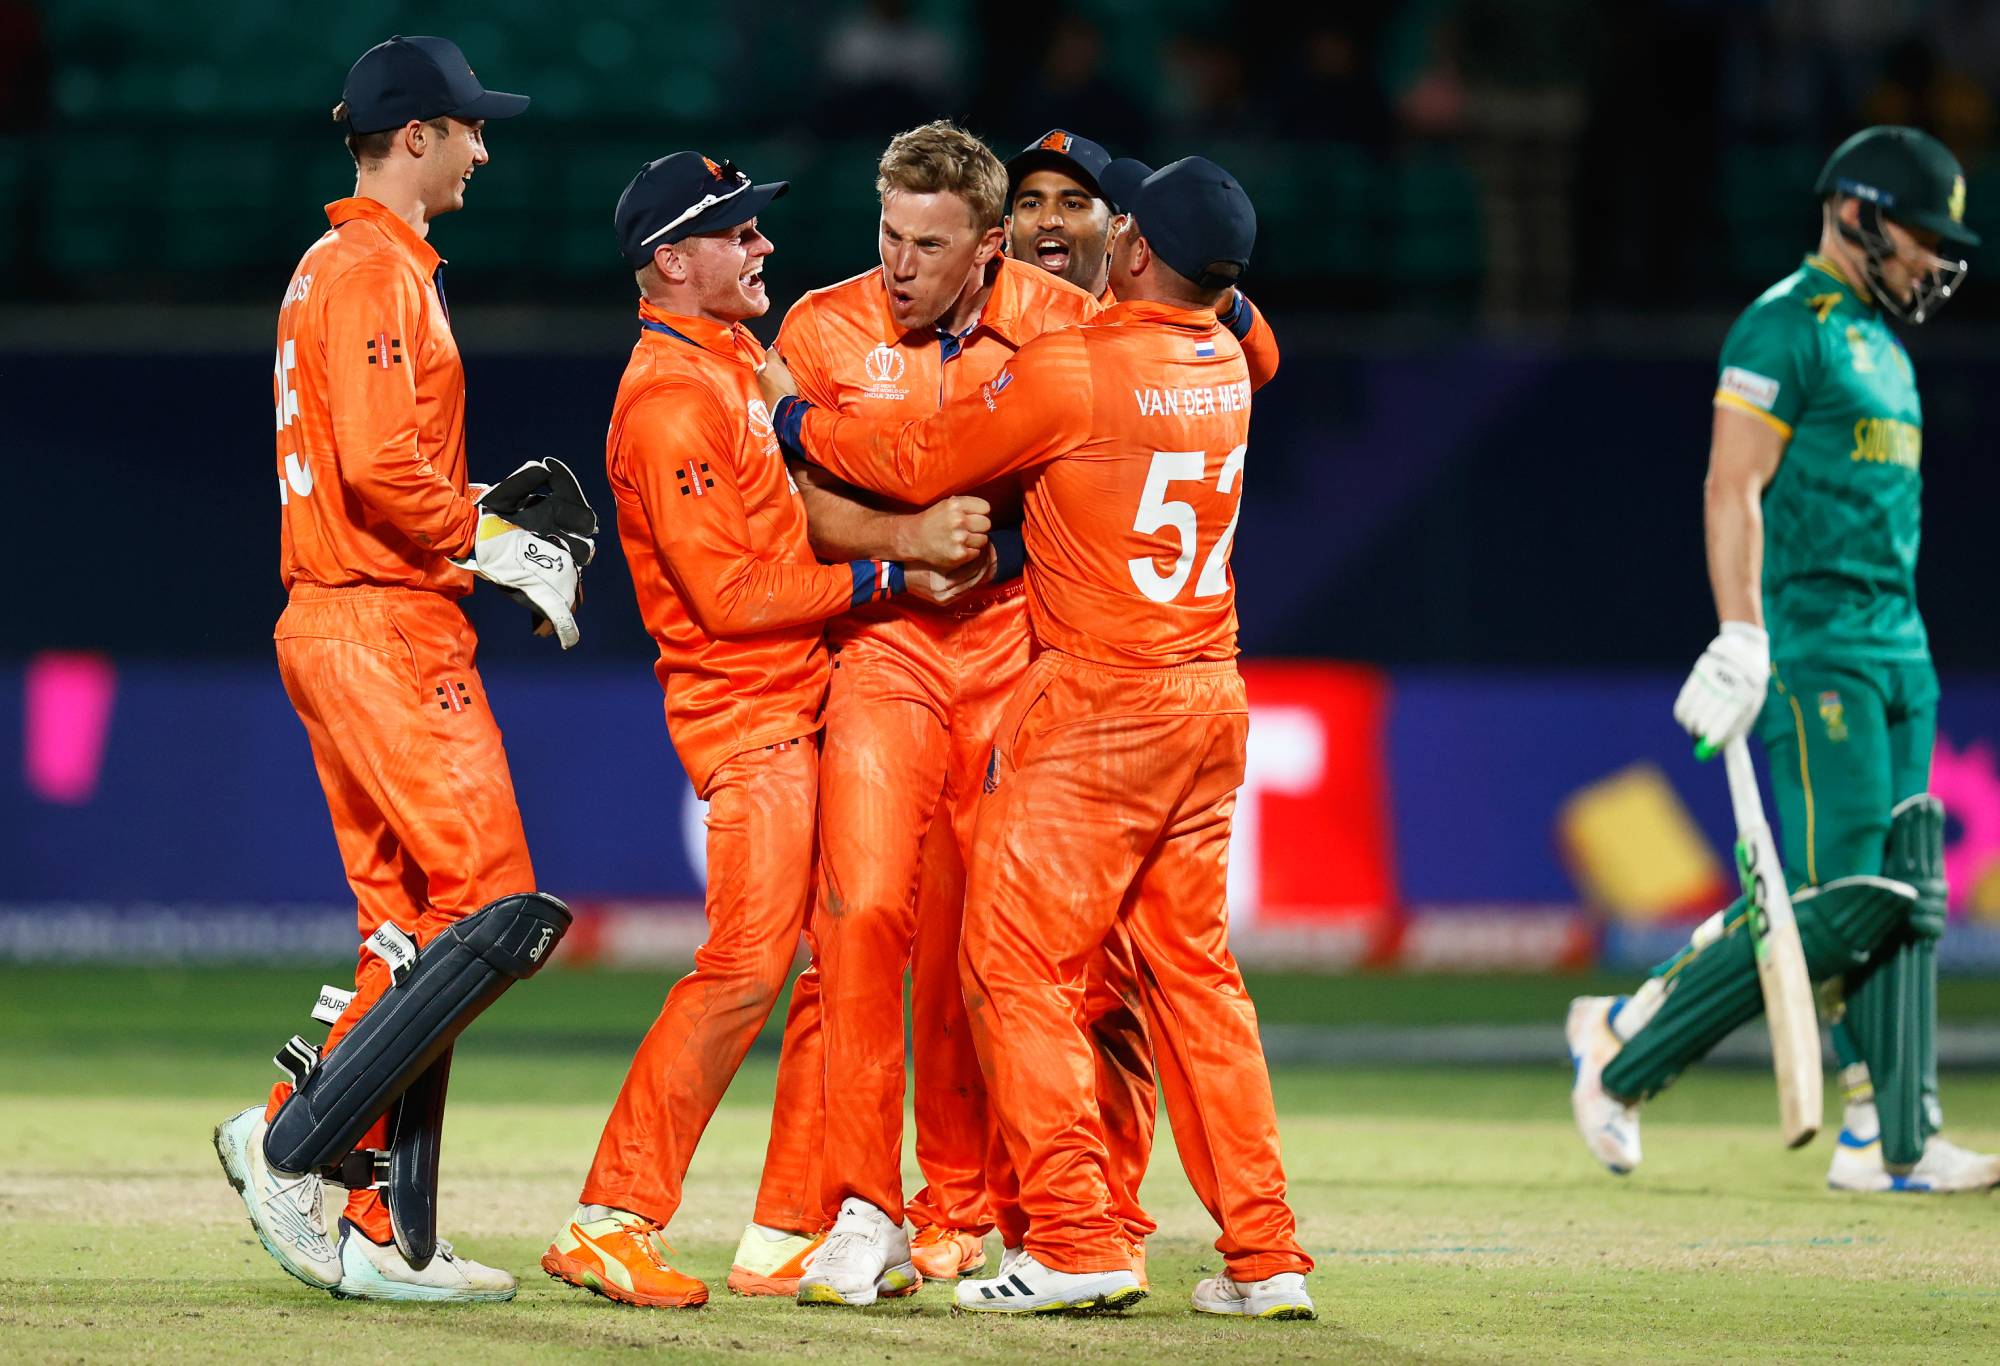 DHARAMSALA, INDIA - OCTOBER 17: Logan van Beek of Netherlands celebrates the wicket of David Miller of South Africa during the ICC Men's Cricket World Cup India 2023 between South Africa and Netherlands at HPCA Stadium on October 17, 2023 in Dharamsala, India. (Photo by Darrian Traynor-ICC/ICC via Getty Images)